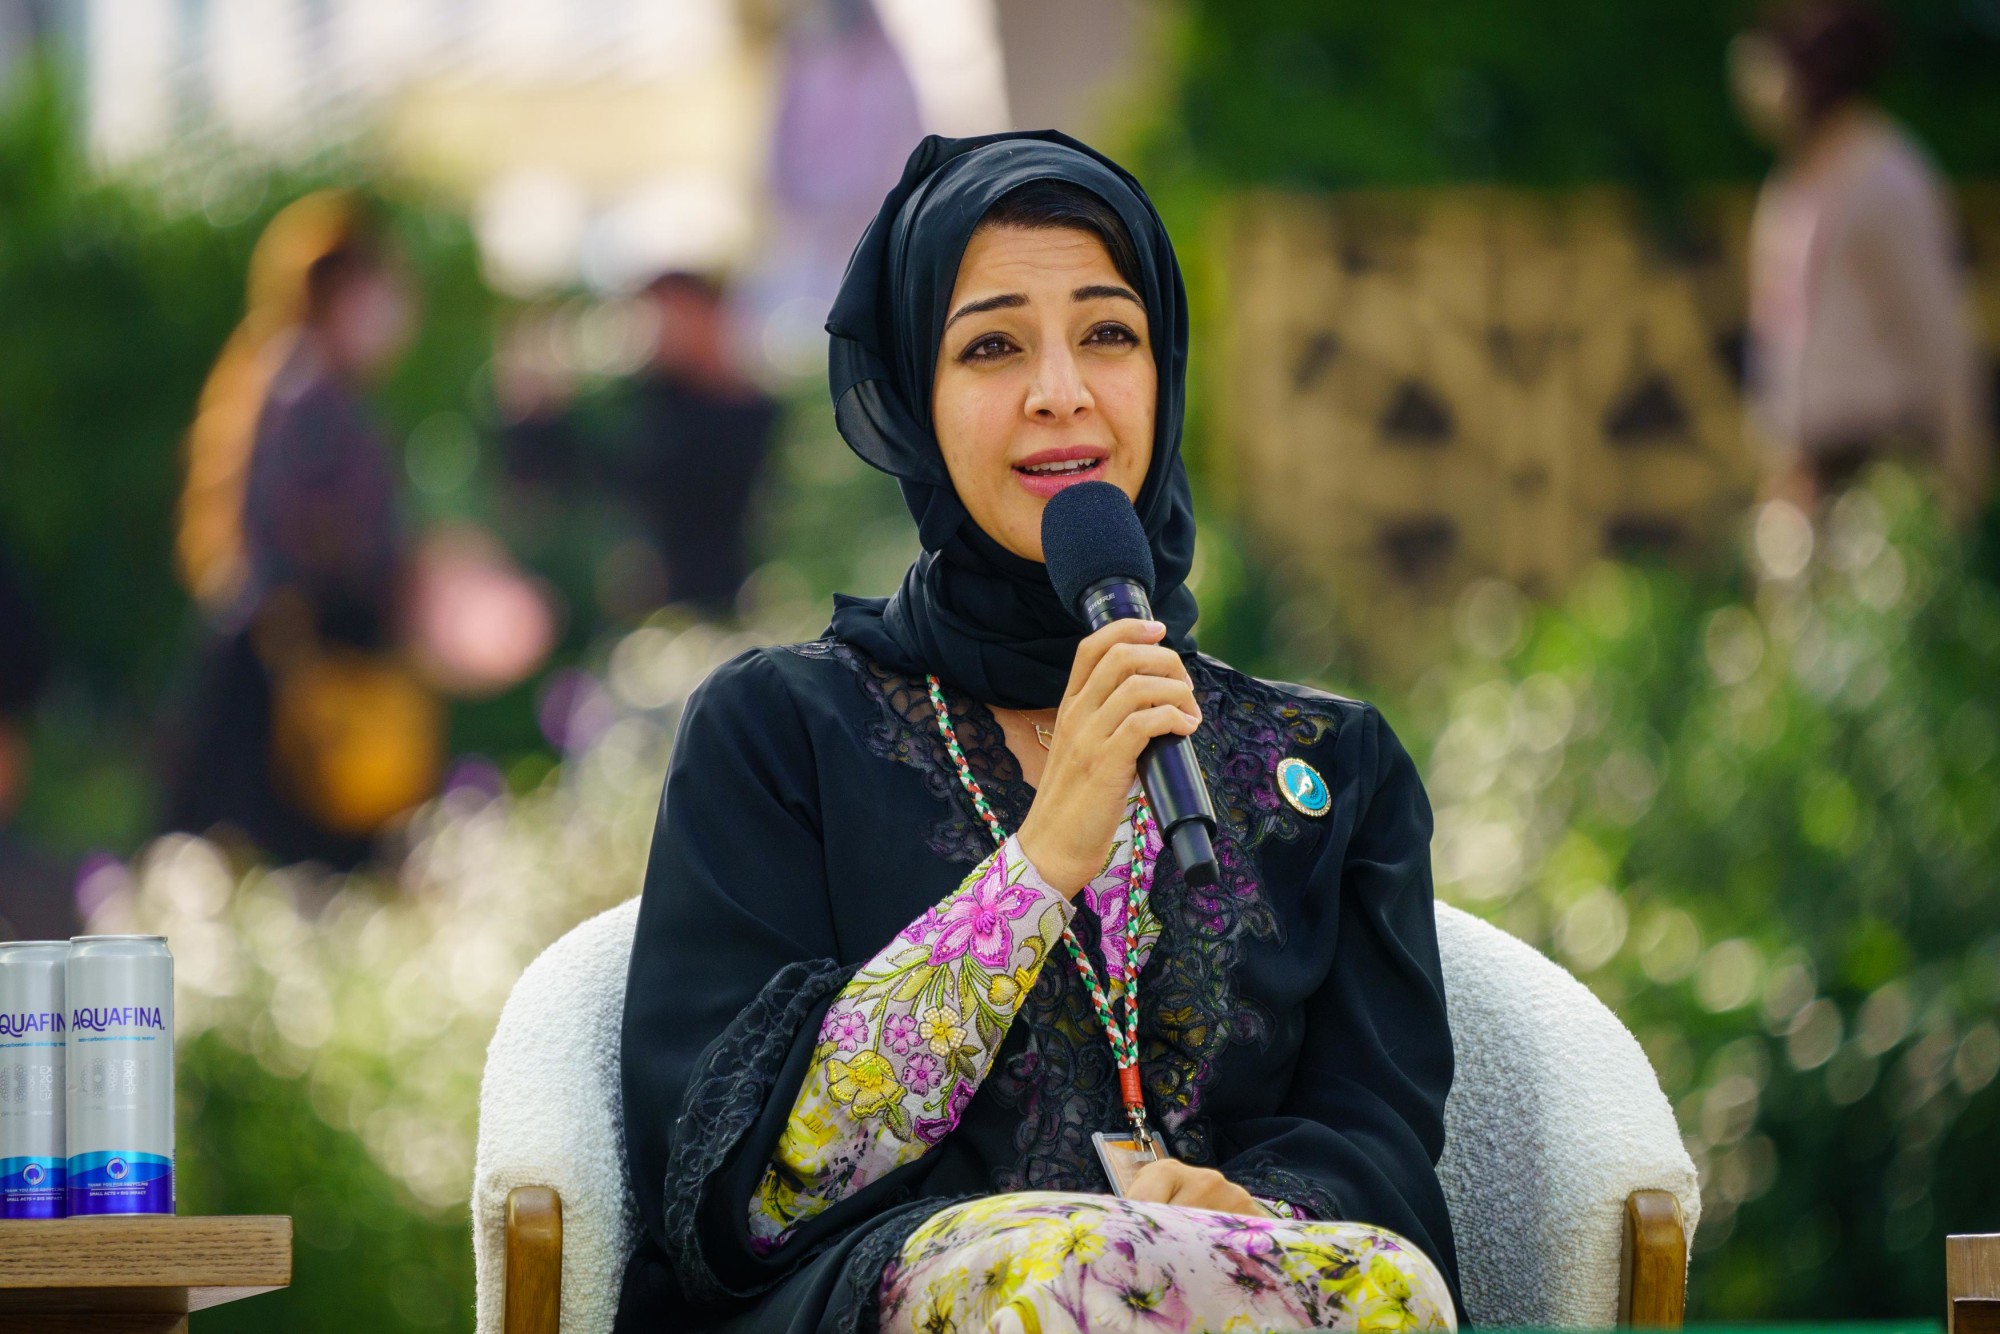 Her Excellency Reem Al Hashimy, UAE Minister of State for International Cooperation, Director General, Expo 2020 Dubai speaks during the World Majlis m9283